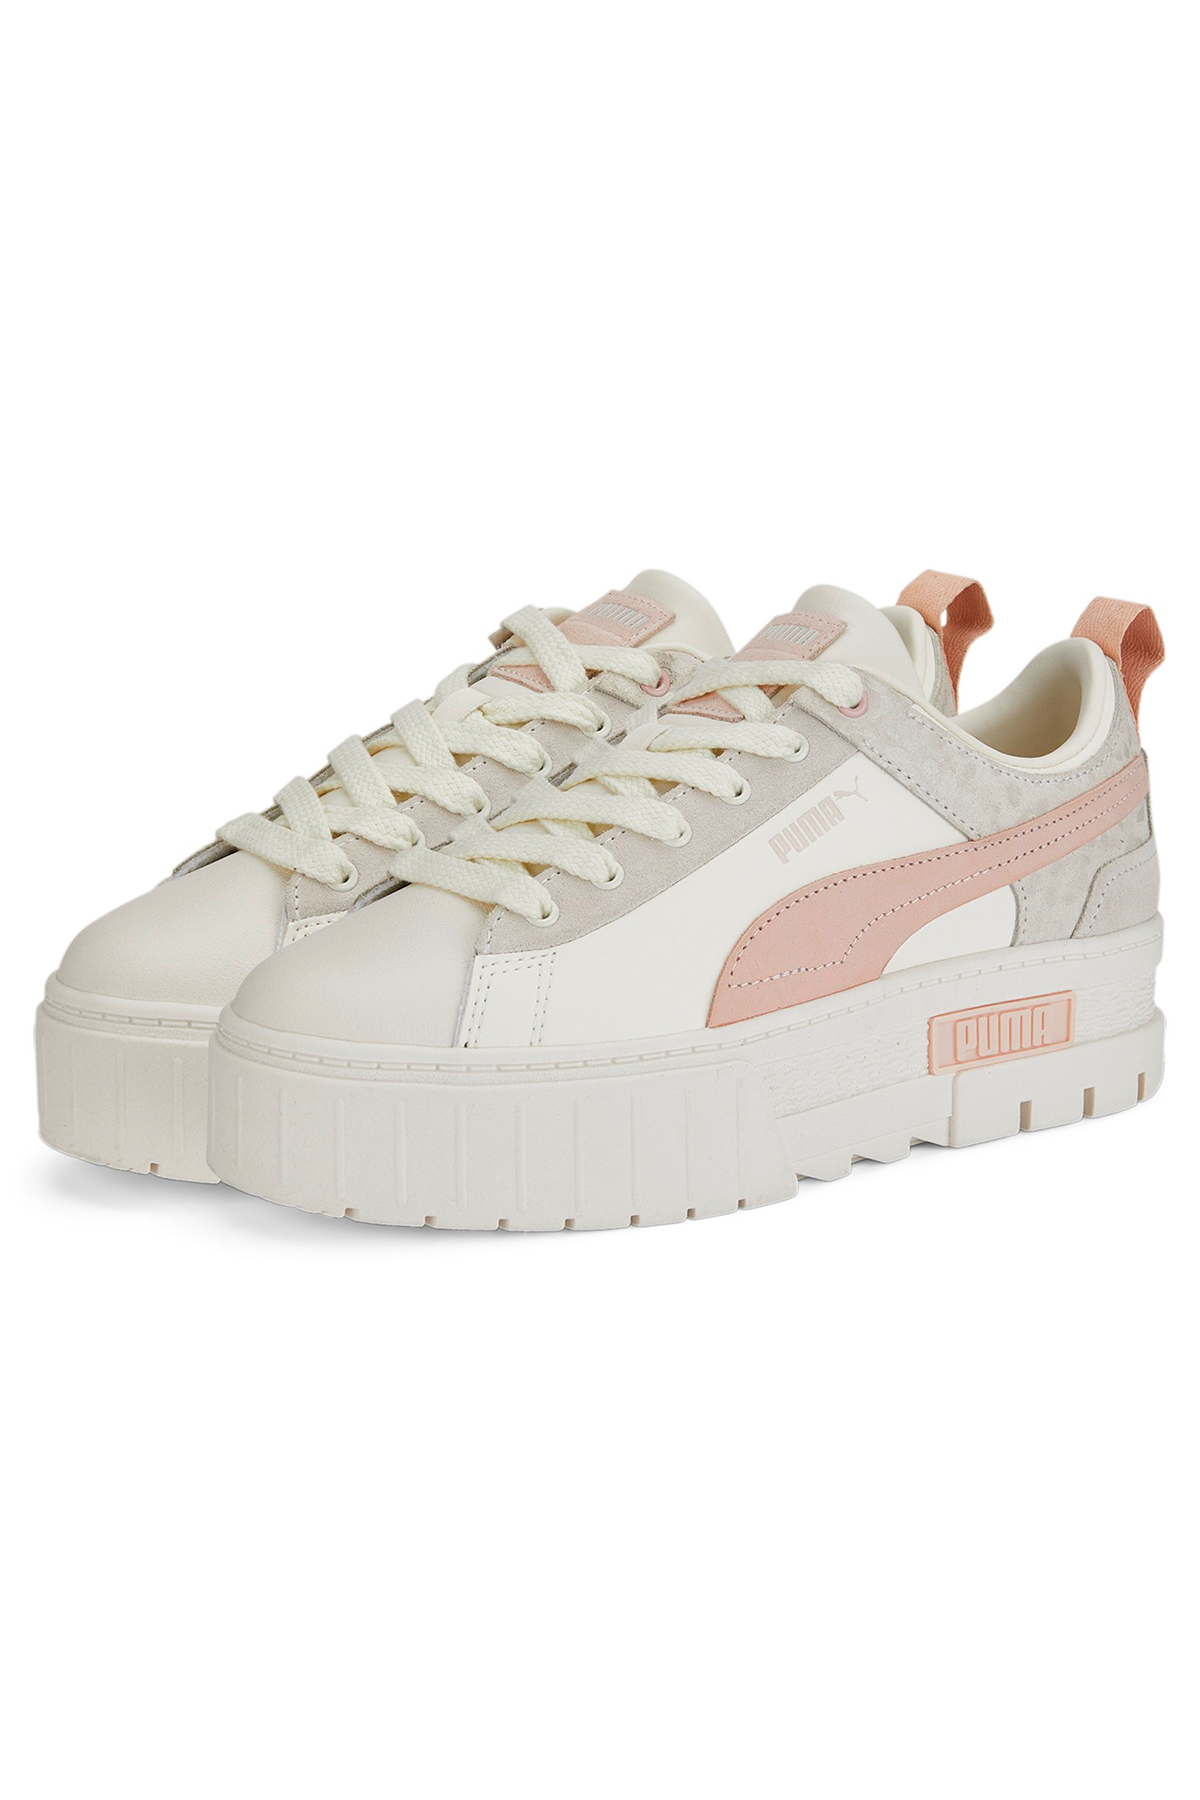 Puma Mayze Raw Muted Animal Sneakers, Farve: Marshmallow, Størrelse: 41, Dame